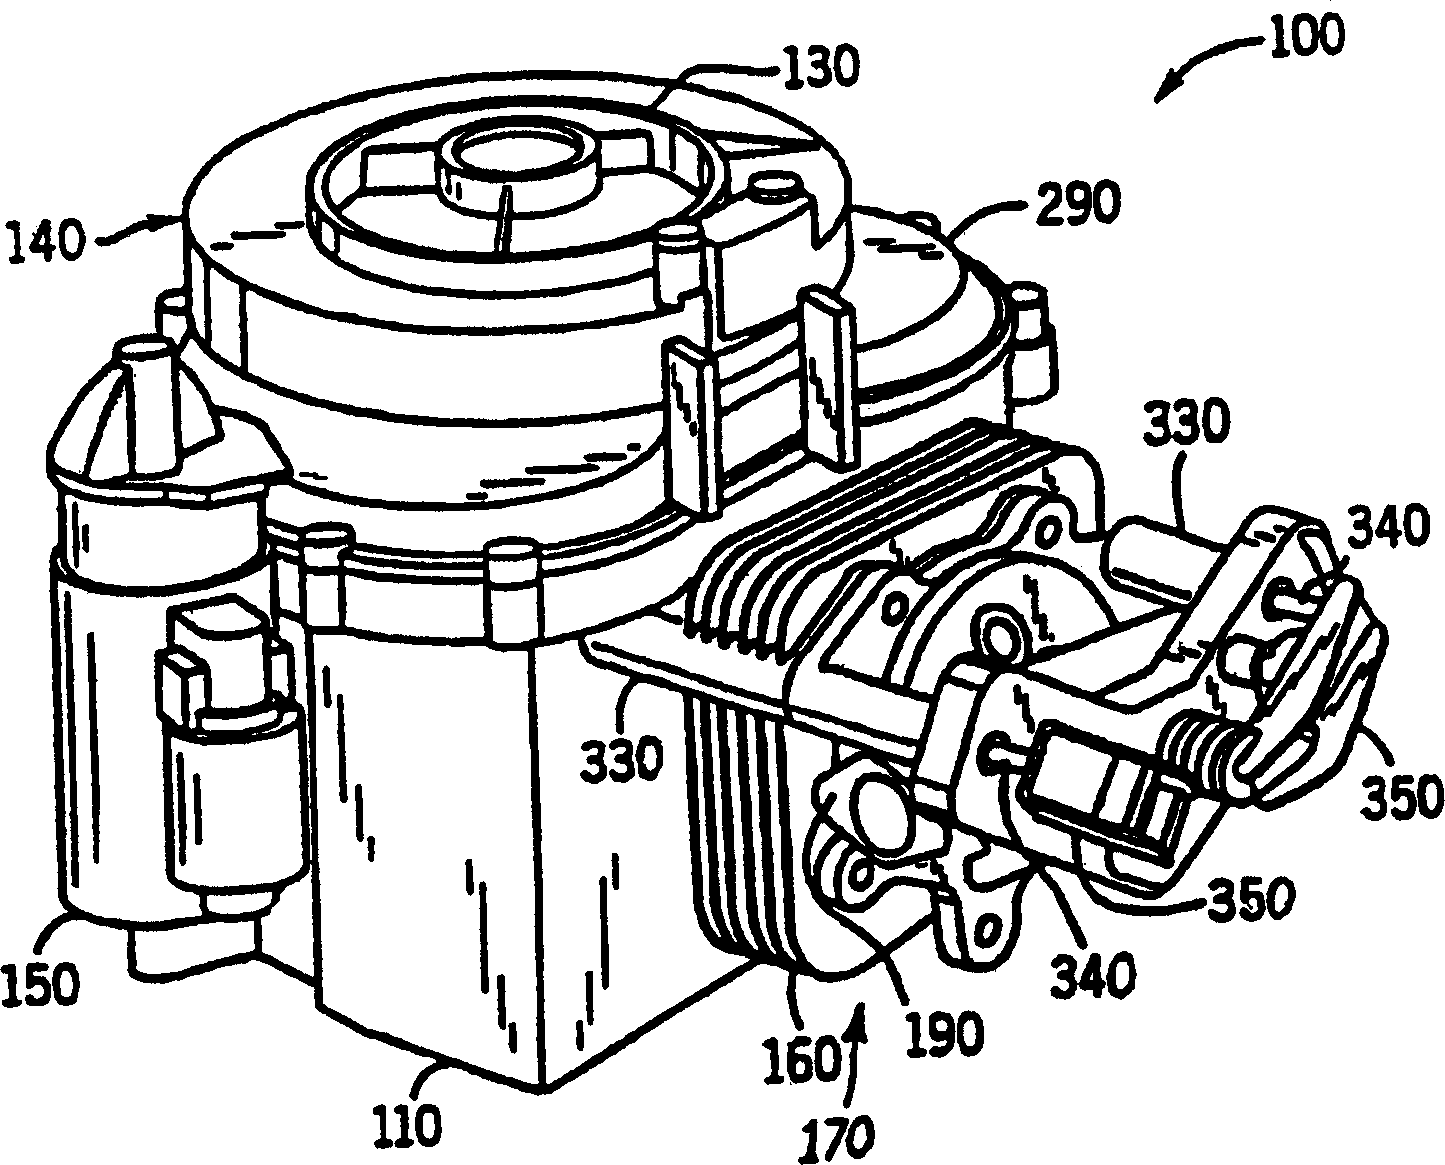 Automatic compression release mechanism